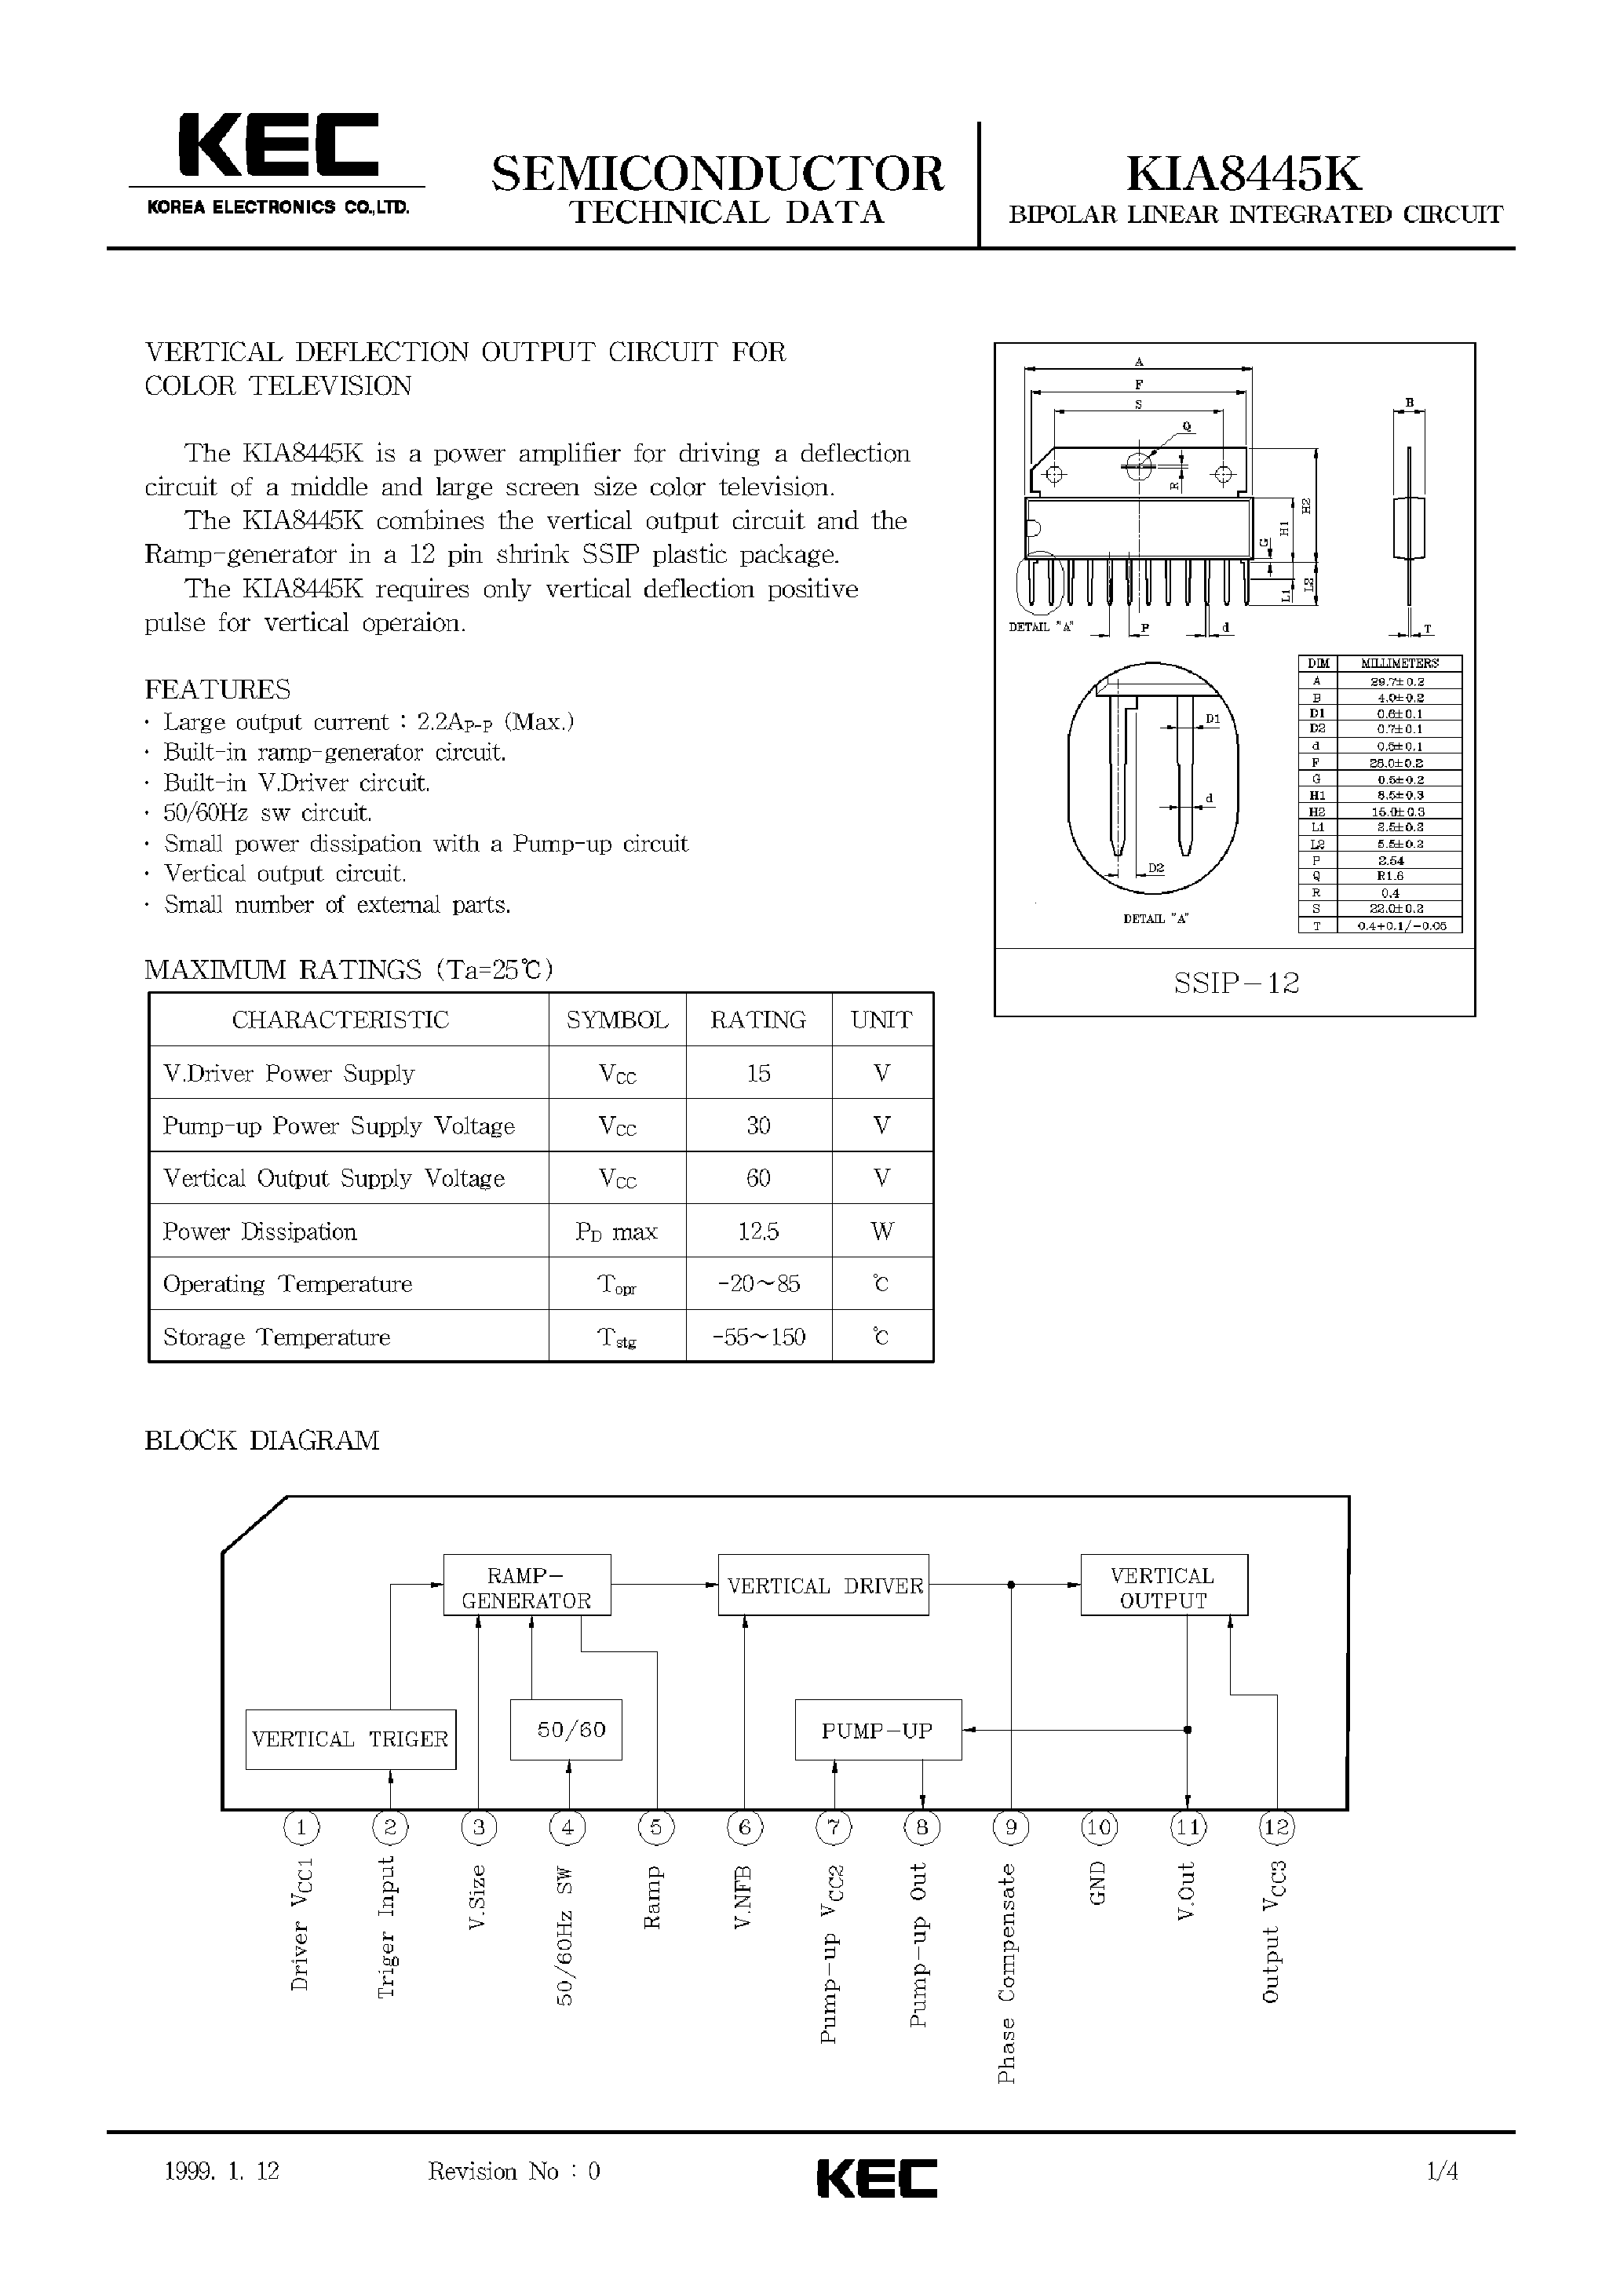 Даташит KIA8445 - BIPOLAR LINEAR INTEGRATED CIRCUIT (VERTICAL DEFLECTION OUTPUT CIRCUIT FOR COLOR TELEVISION) страница 1